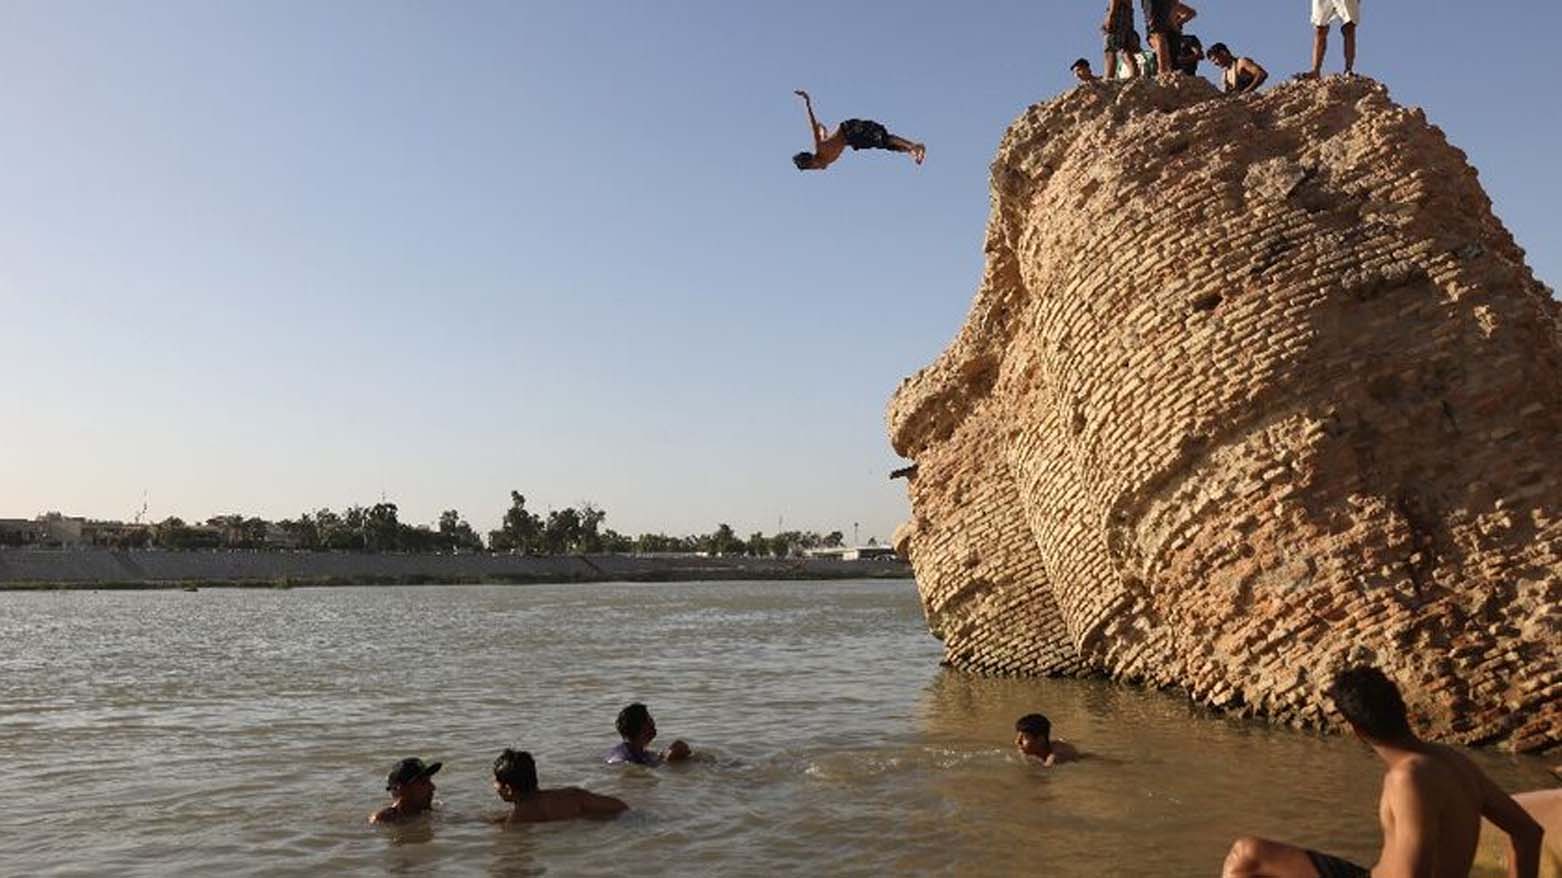 Tourists and residents dive into the Tigris River amid scorching summer heat. (Photo: Ahmad Al-Rubaye/AFP)